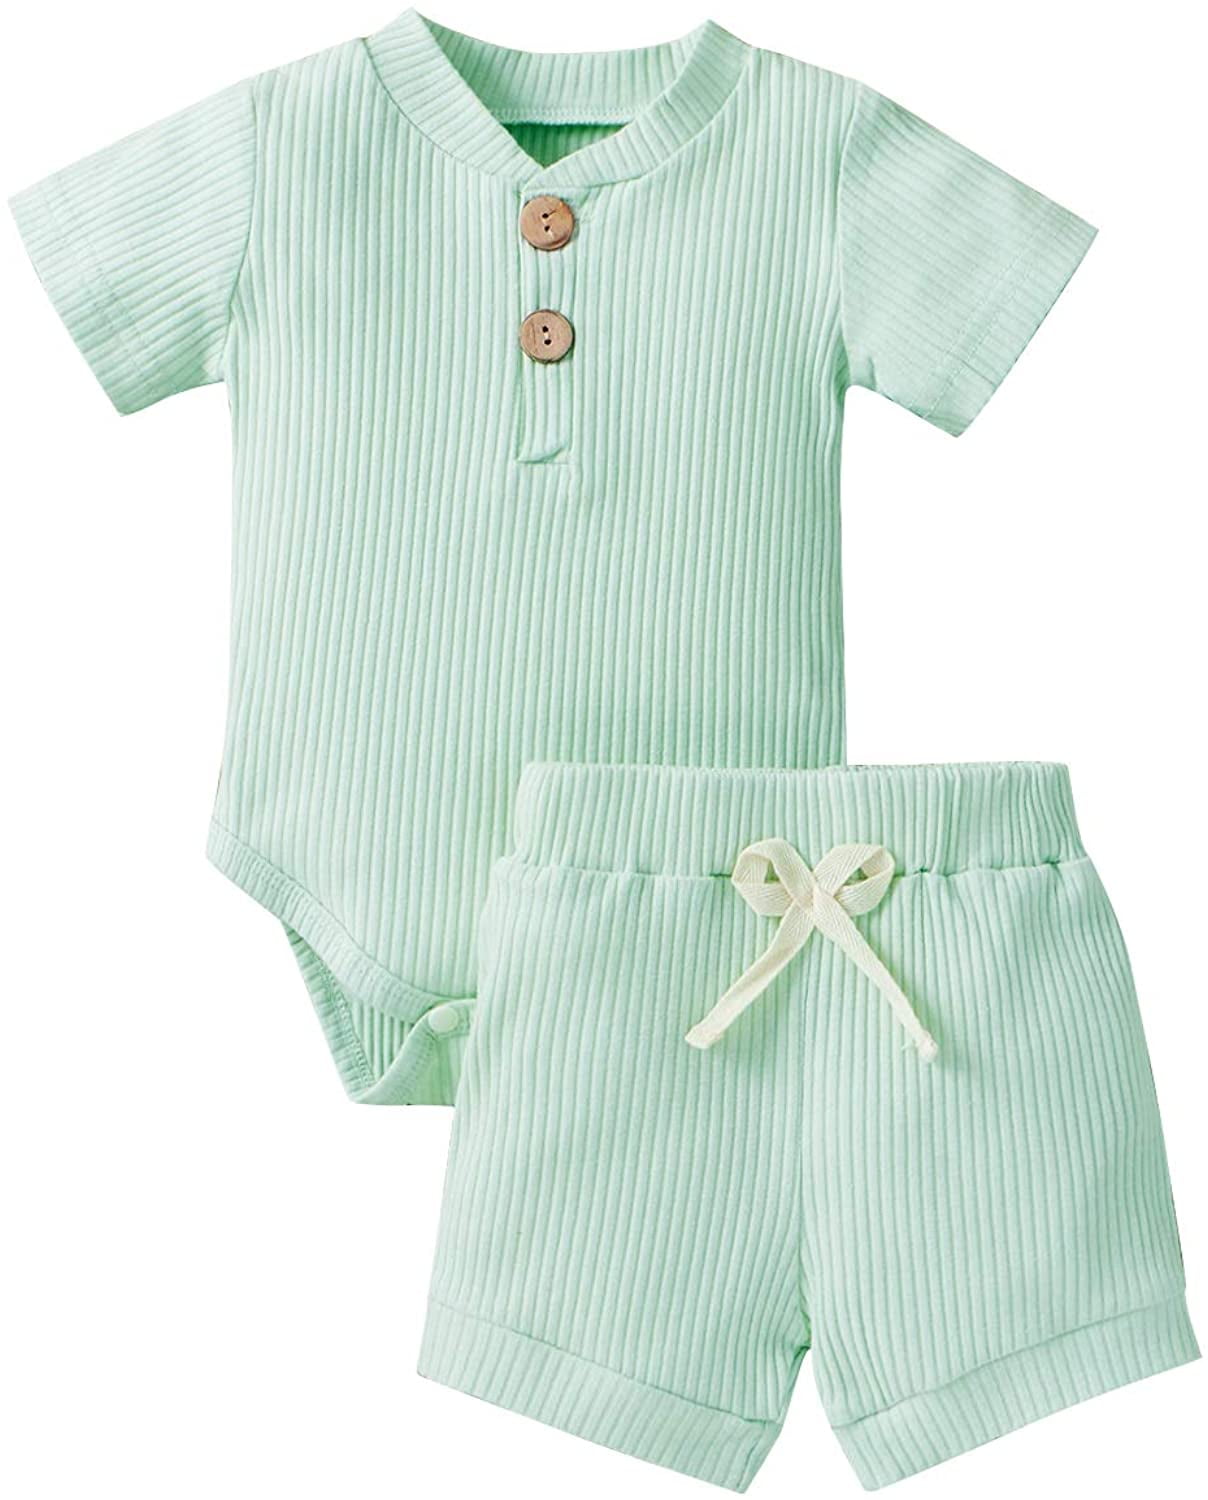 Newborn Baby Boy Girl Summer Clothes Unisex Infant Solid Ribbed Cotton Outfit Short Sleeve Pocket Tops Pants Shorts Set